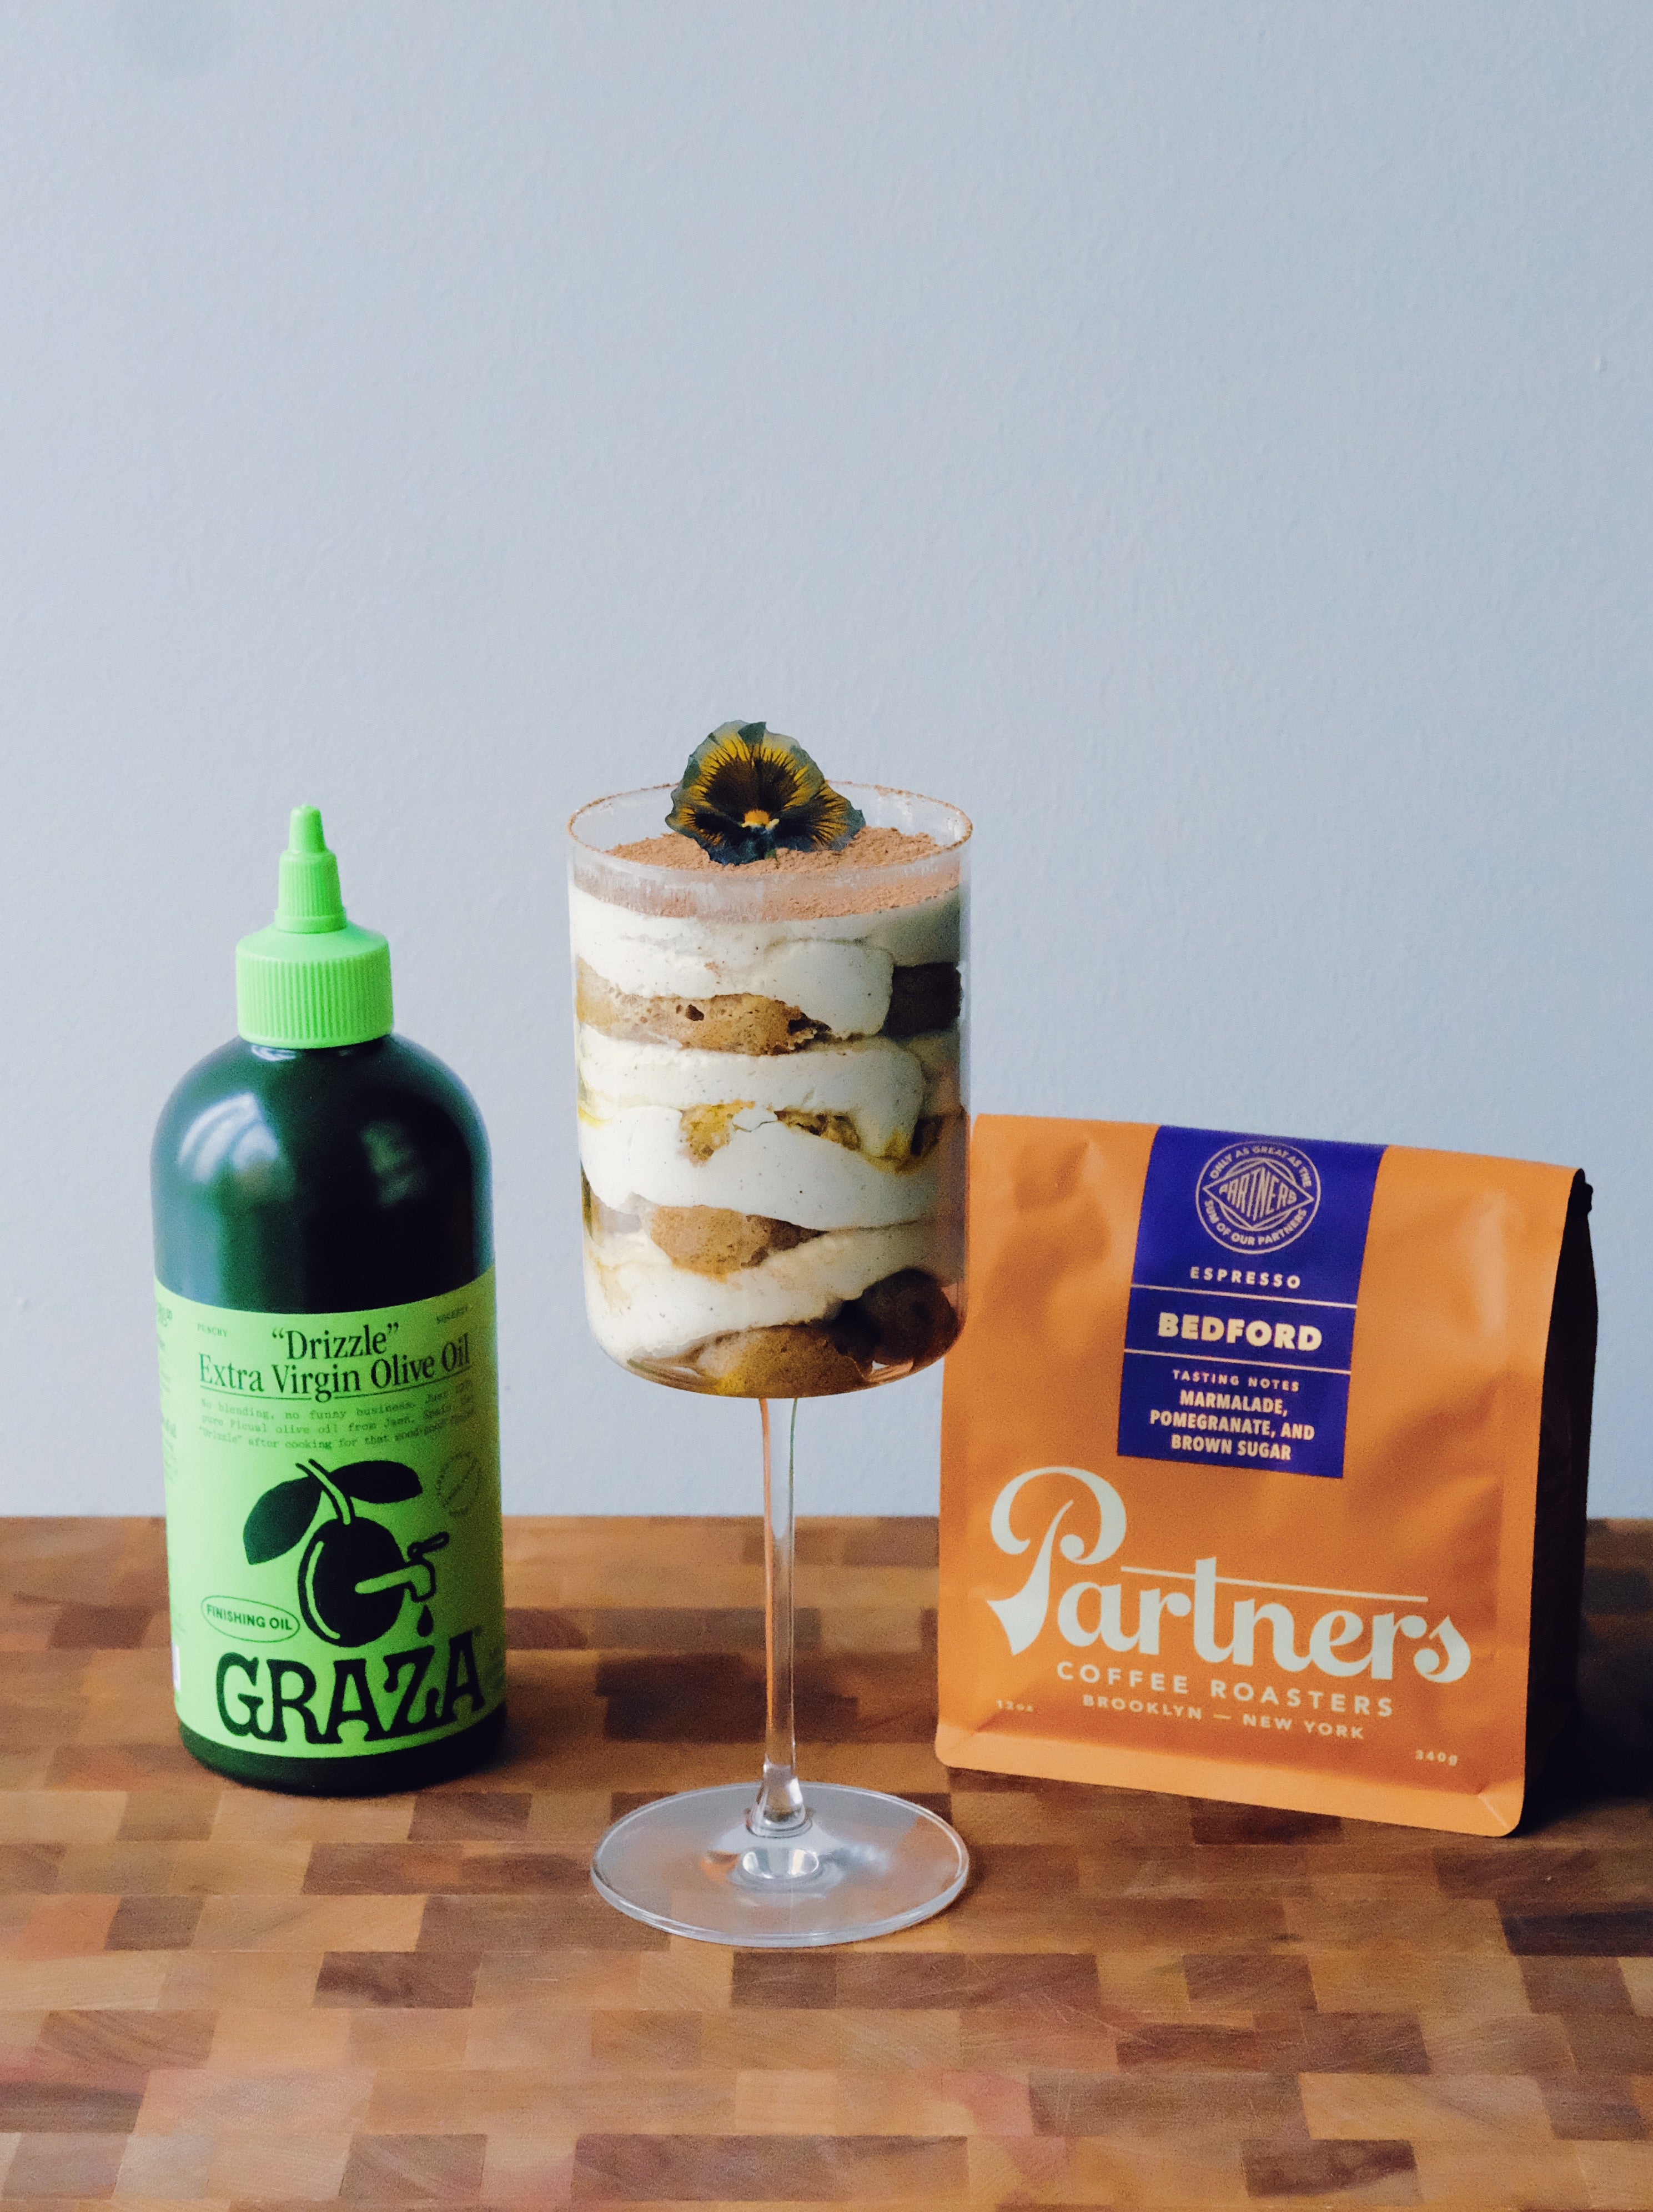 A bottle of green Graza olive oil sits to the left. In the middle there is a wine glass with layered Tiramisu topped with an edible flower. On the right an orange bag of Partners Coffee sits, labeled "Bedford"